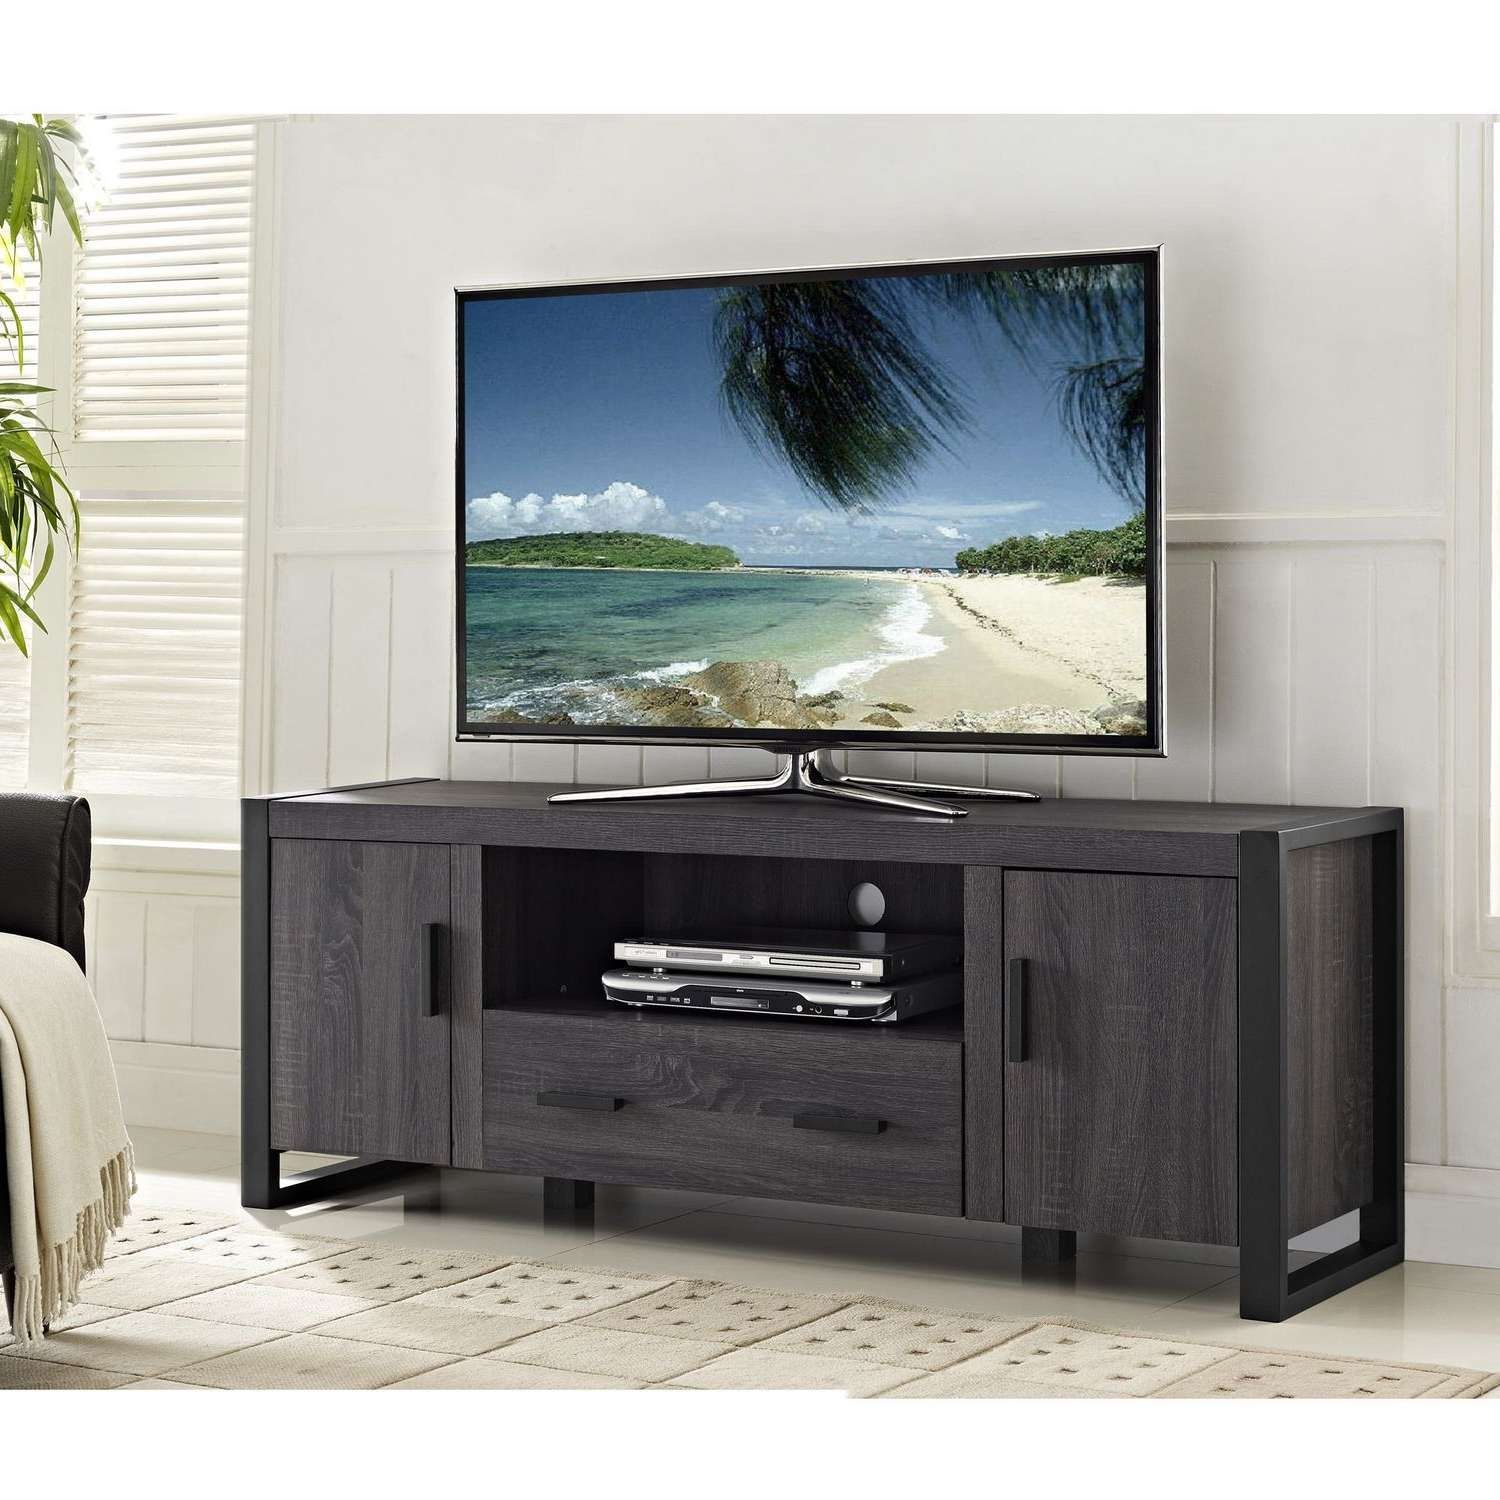 We Furniture 60" Grey Wood Tv Stand Console | Walmart Canada In Grey Tv Stands (View 5 of 15)